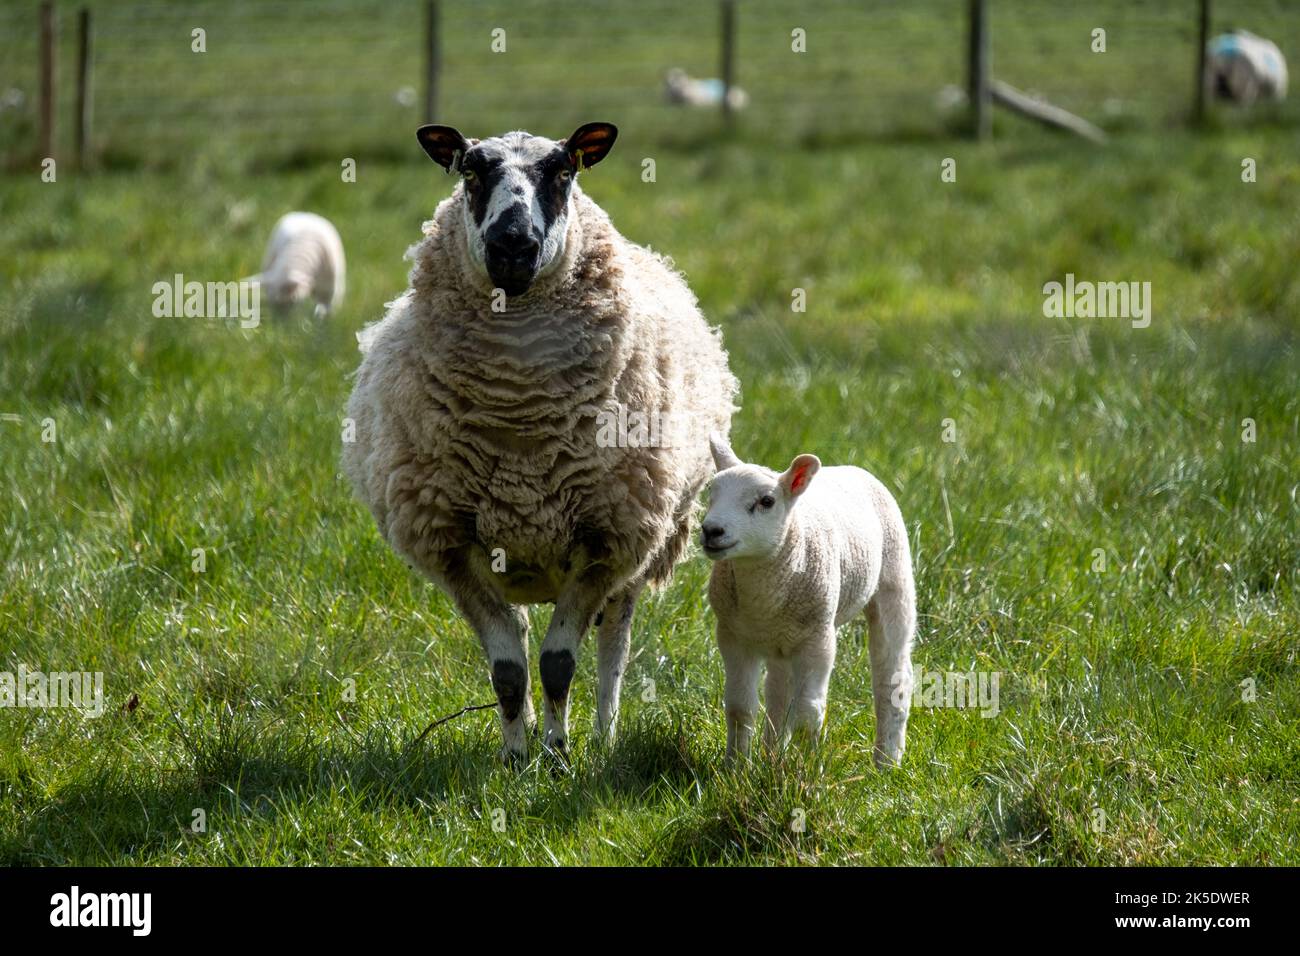 A sheep and her lamb in a field in Hanbury, Worcestershire. Stock Photo